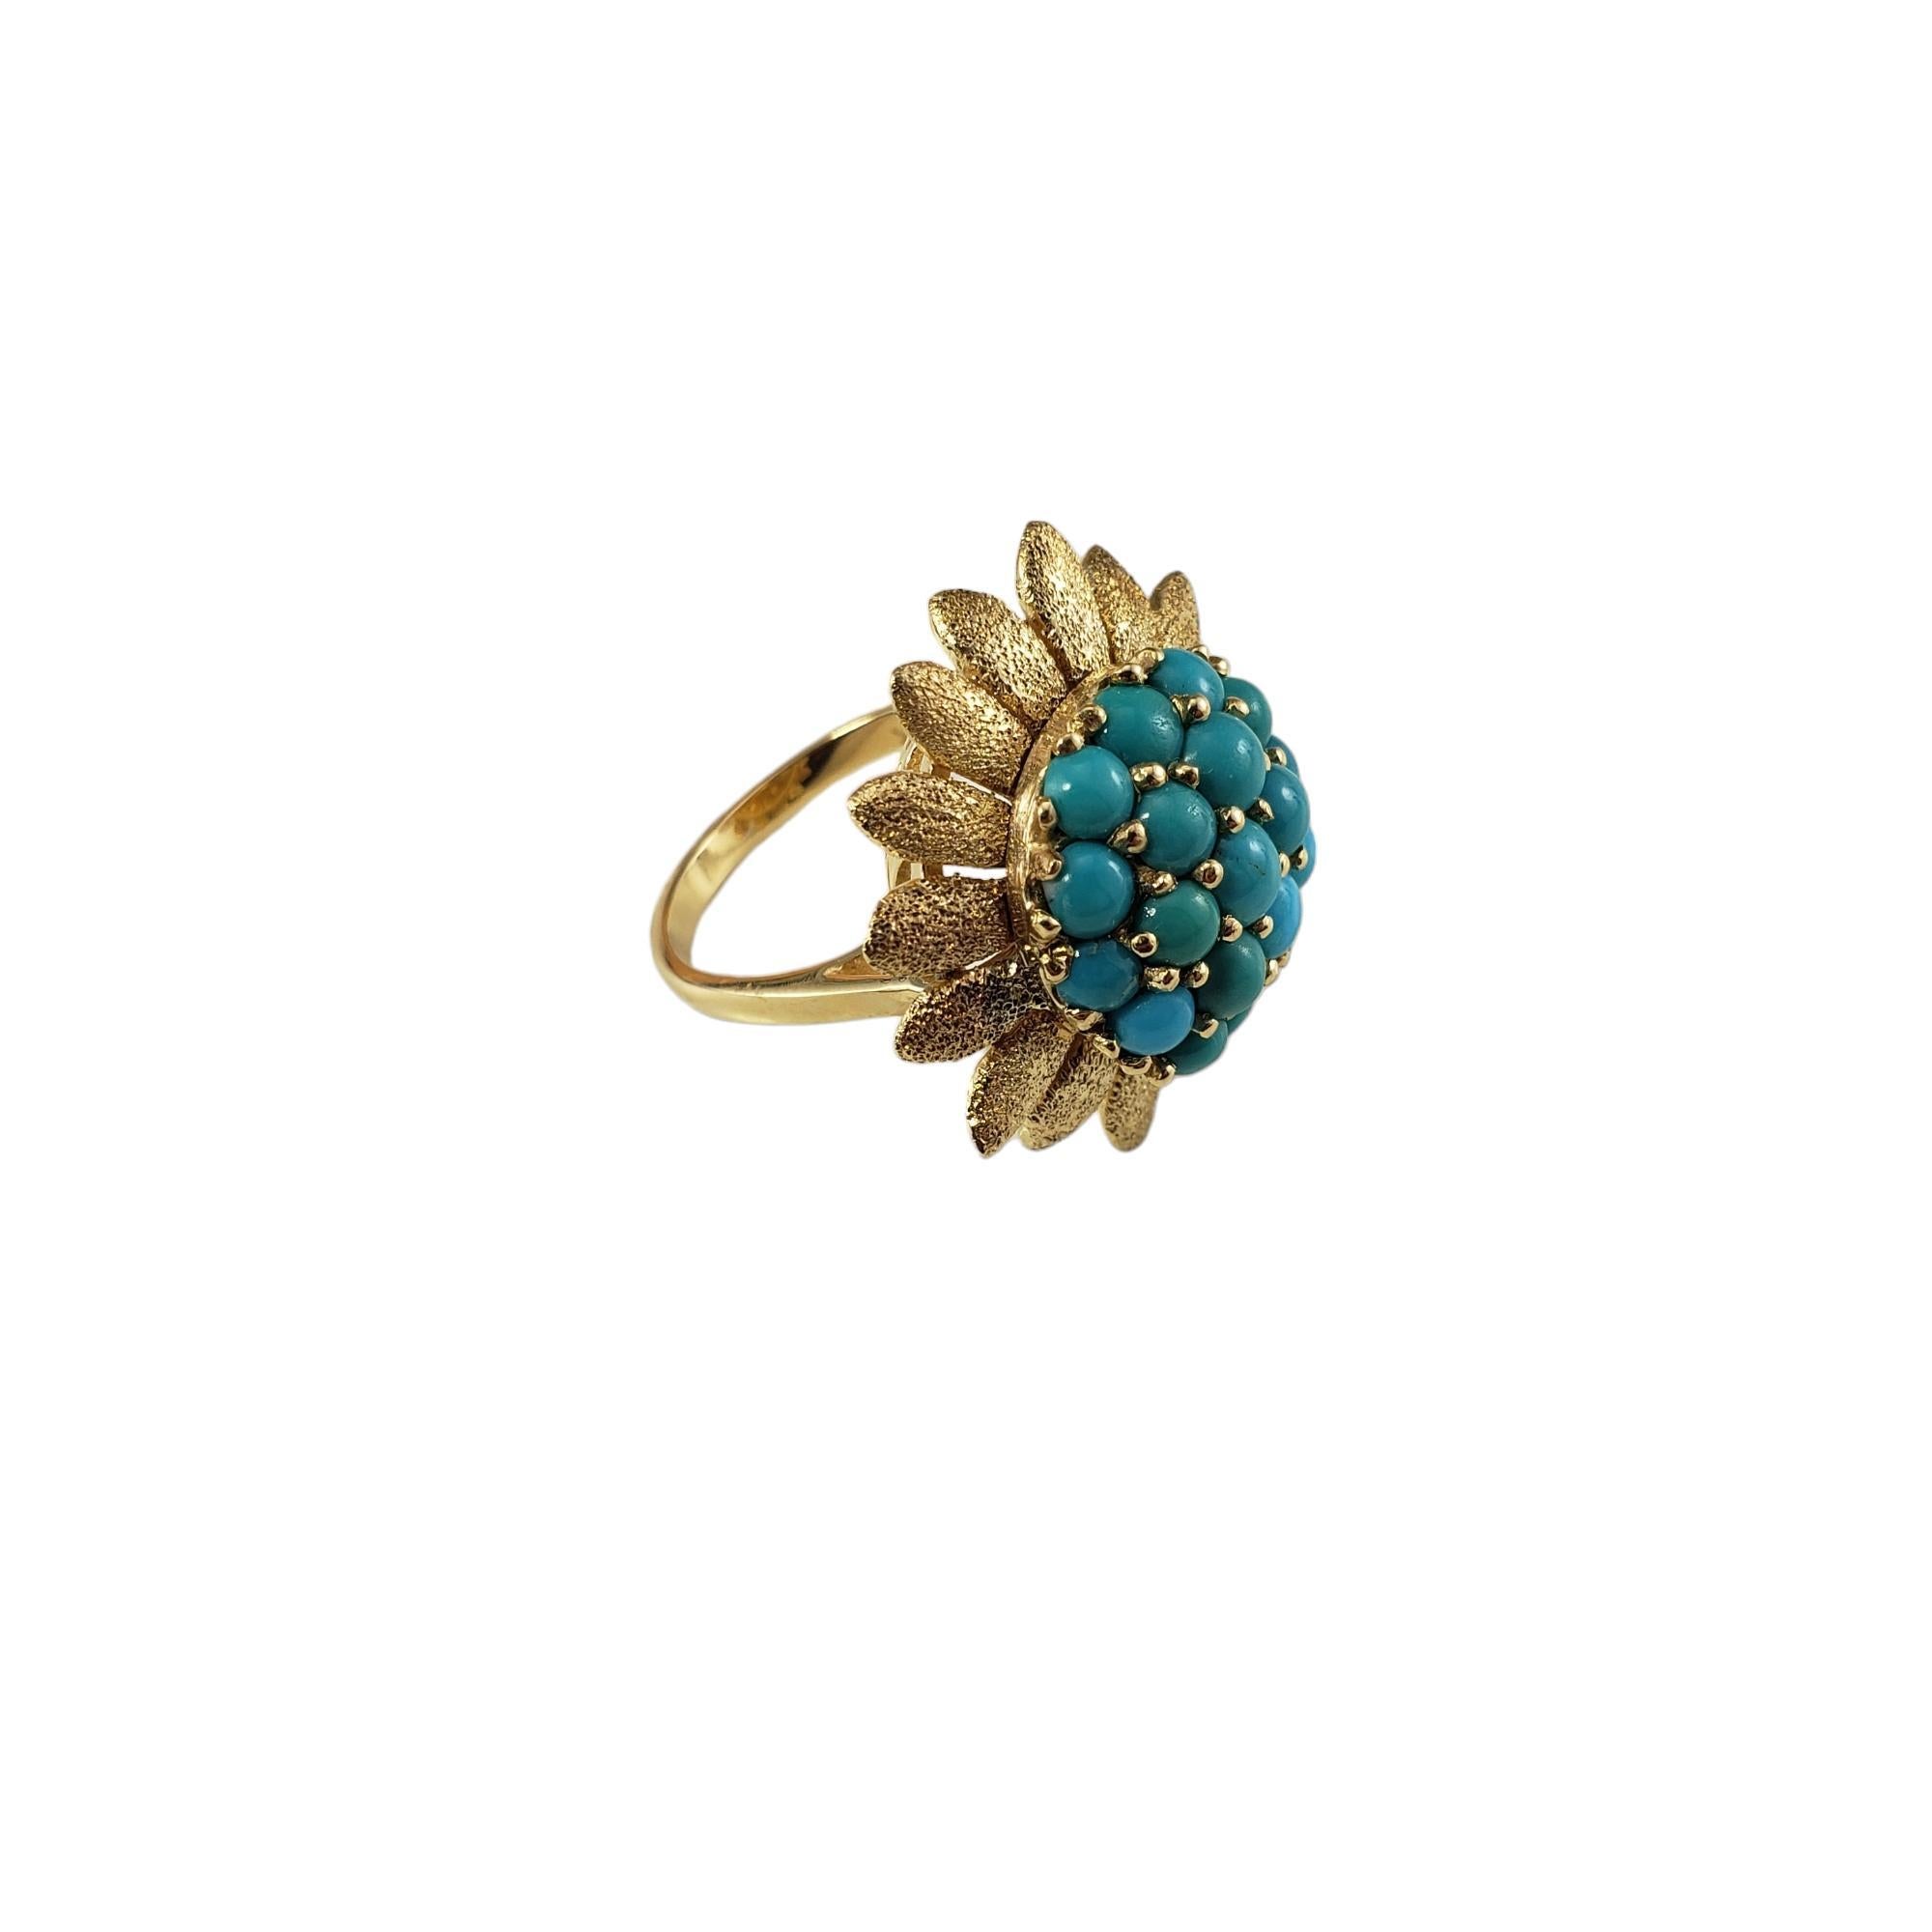 14 Karat Yellow Gold and Turquoise Sunflower Ring Size 6.25-6.5 #16077 In Good Condition For Sale In Washington Depot, CT